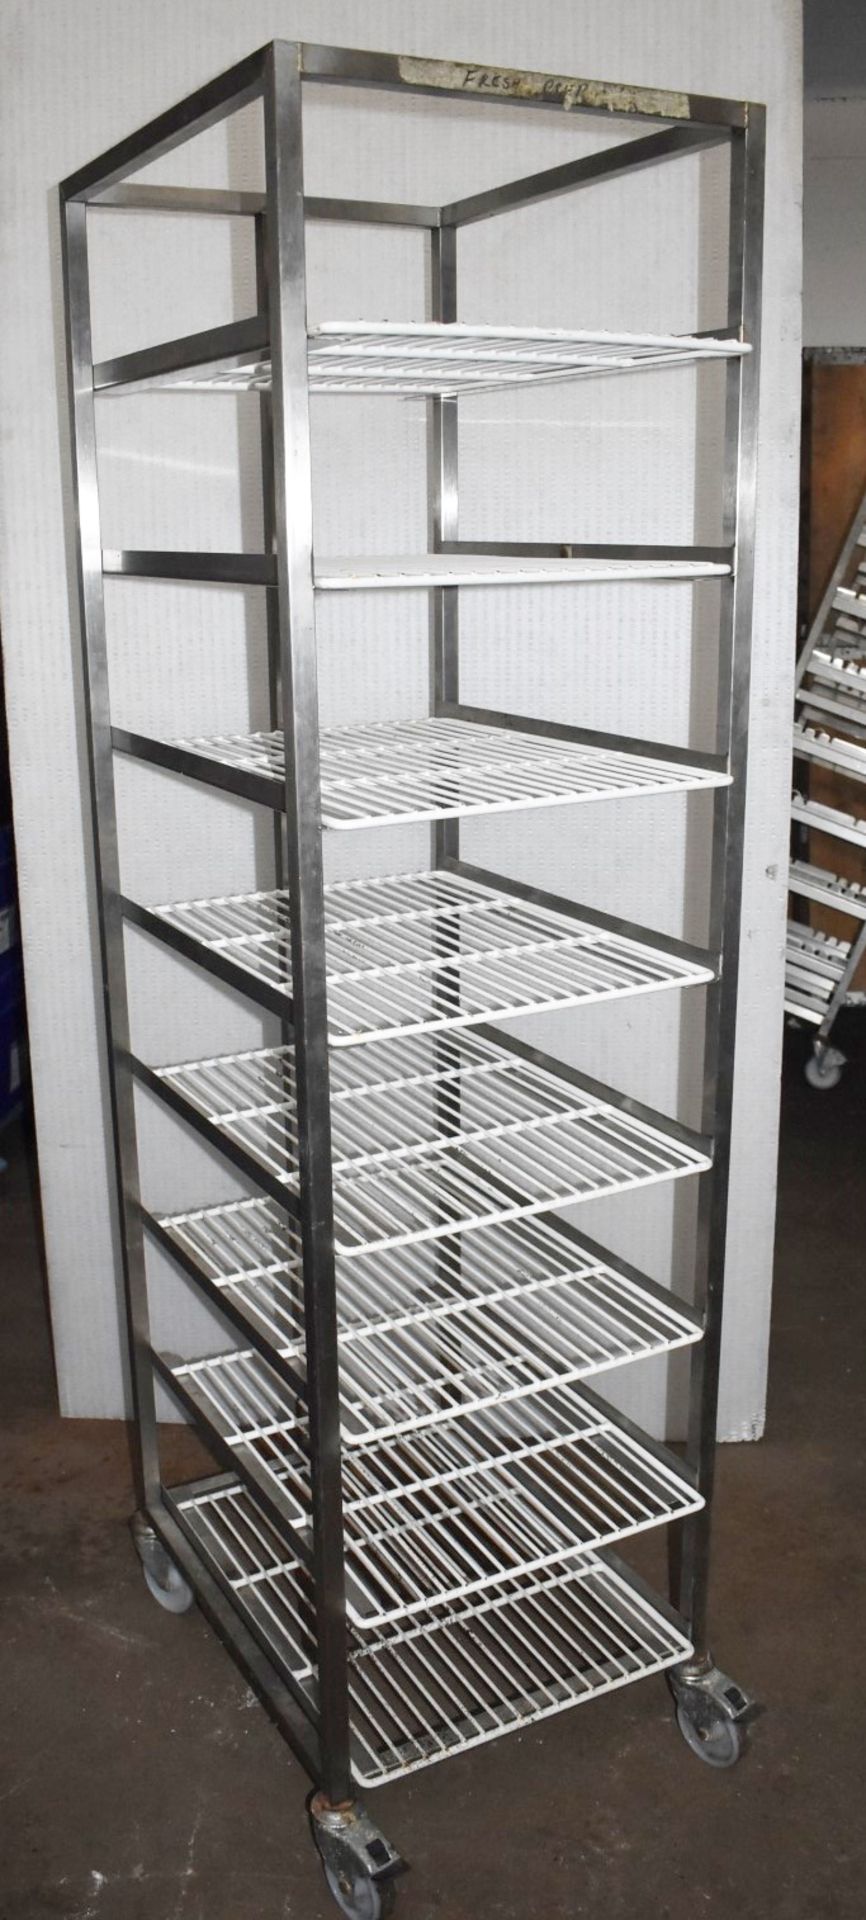 1 x Upright Stainless Steel Mobile Tray Rack With 8 Shelves - Shelf Size: 47 x 63 cms - CL675 - Ref: